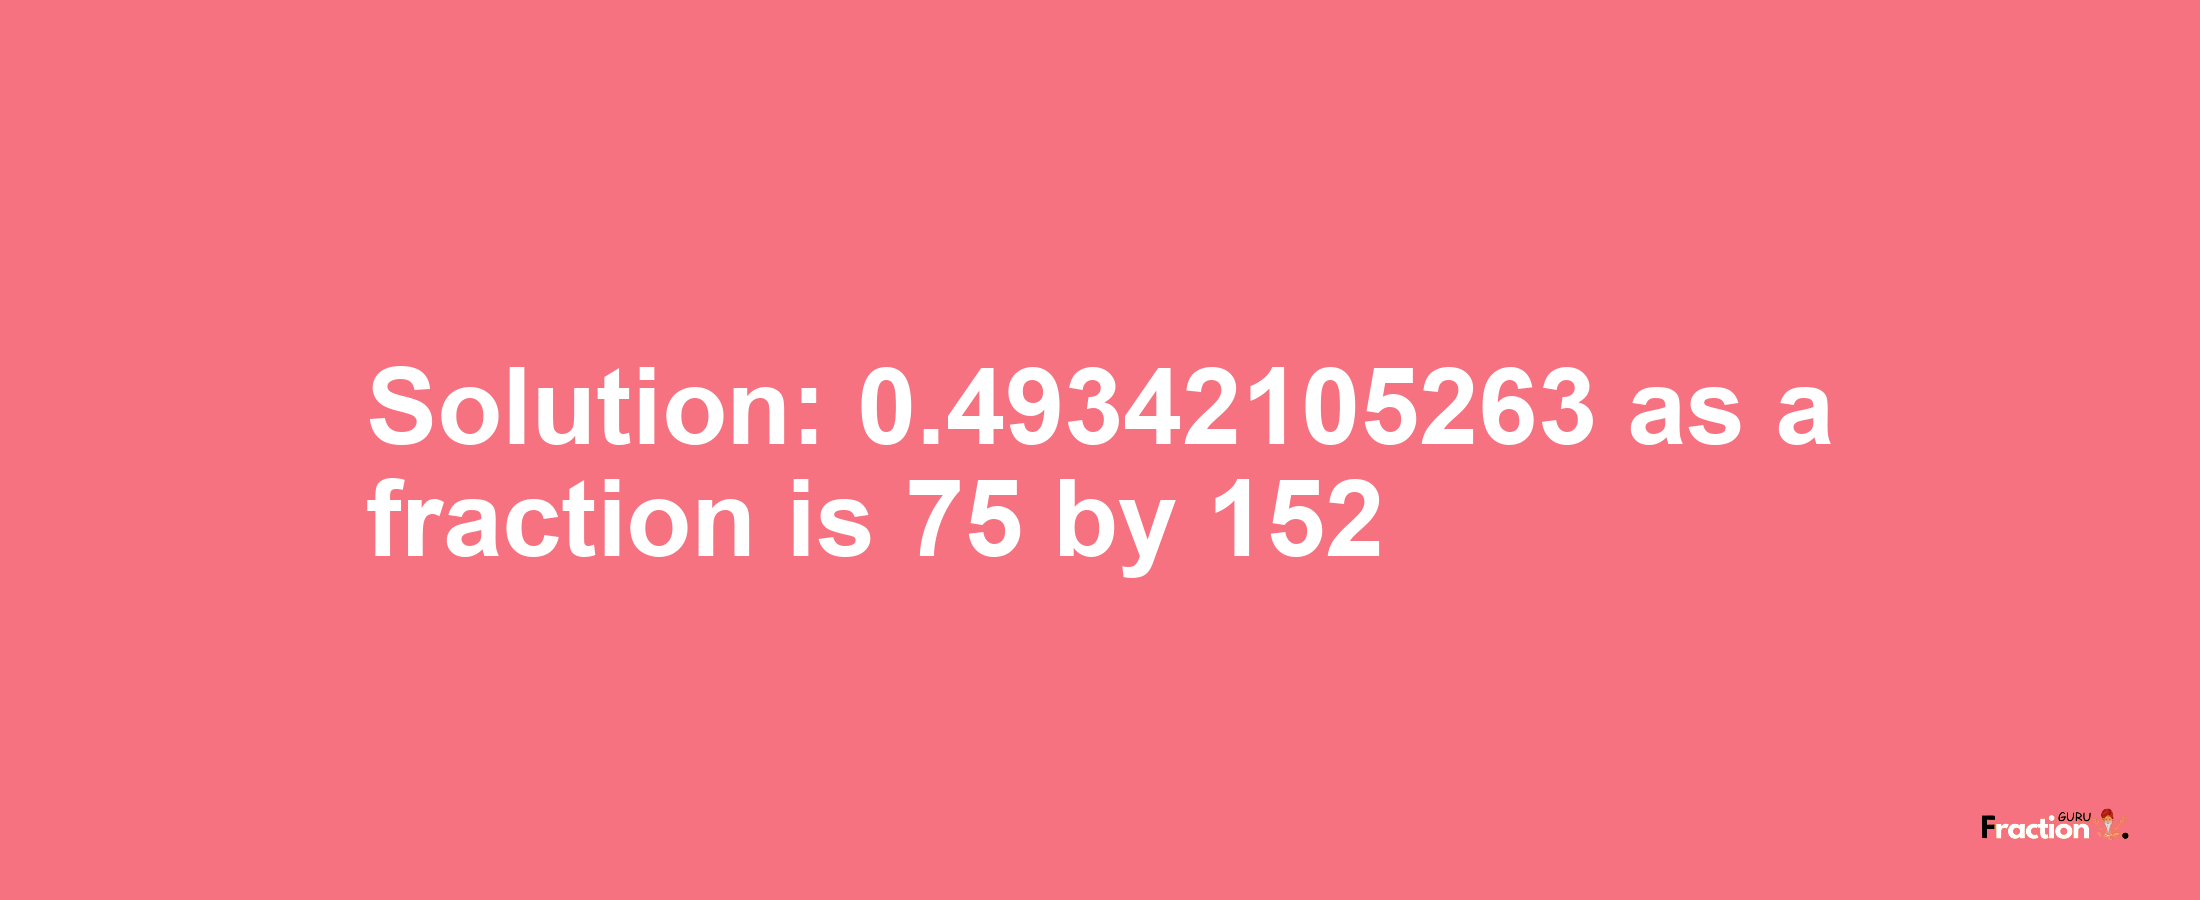 Solution:0.49342105263 as a fraction is 75/152